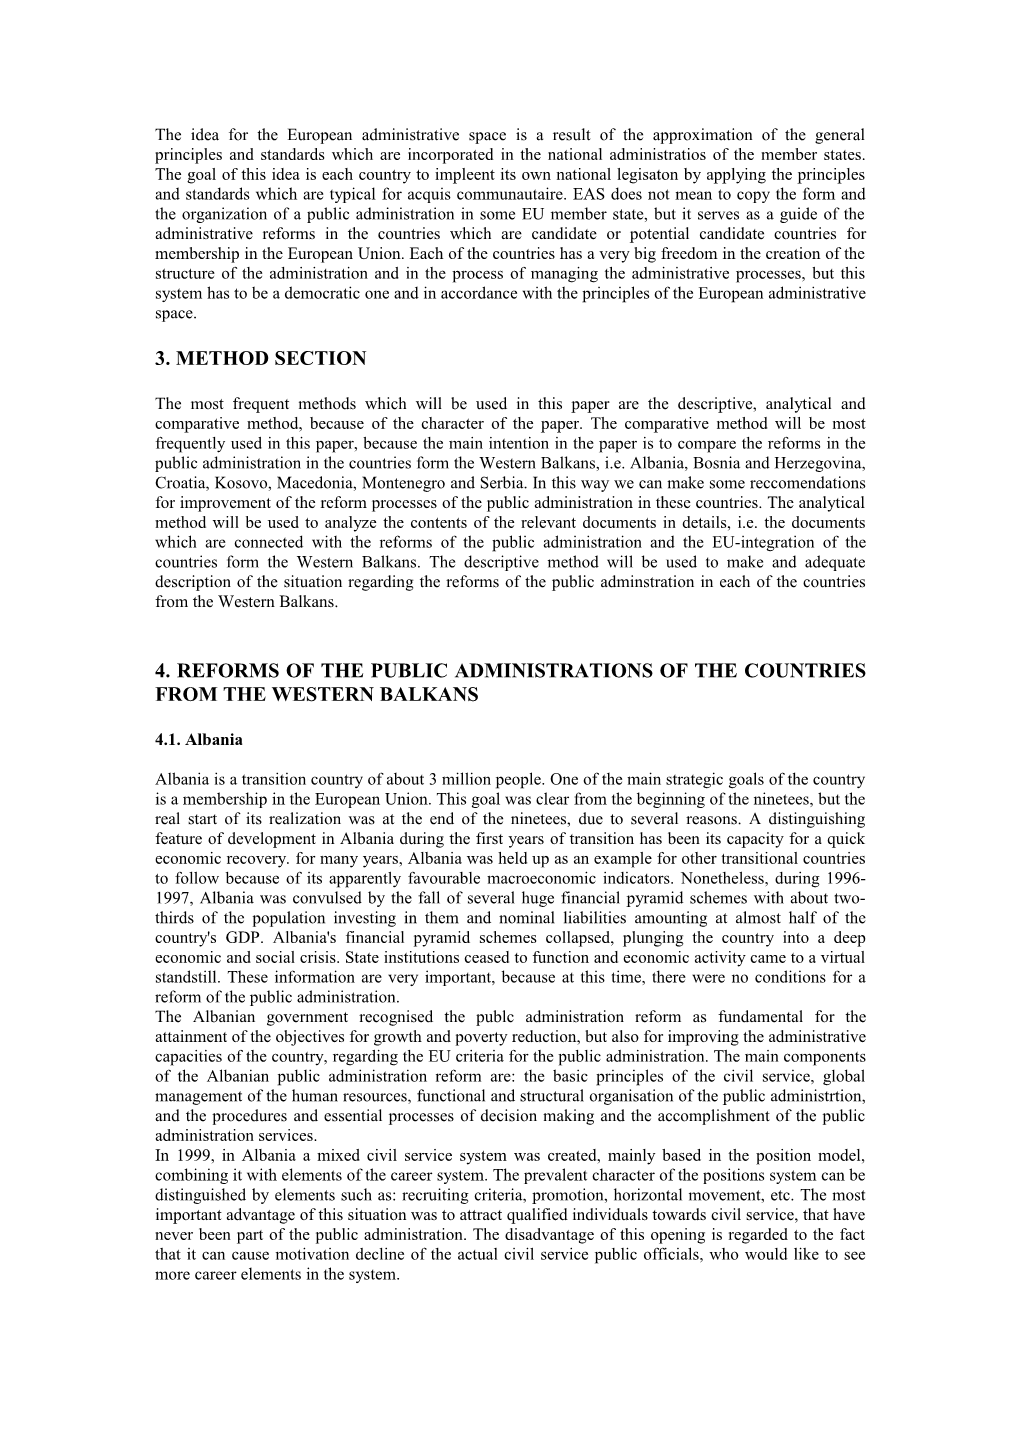 Title: Fulfillment of the Madrid Criteria Through the Reforms of the Public Administrations